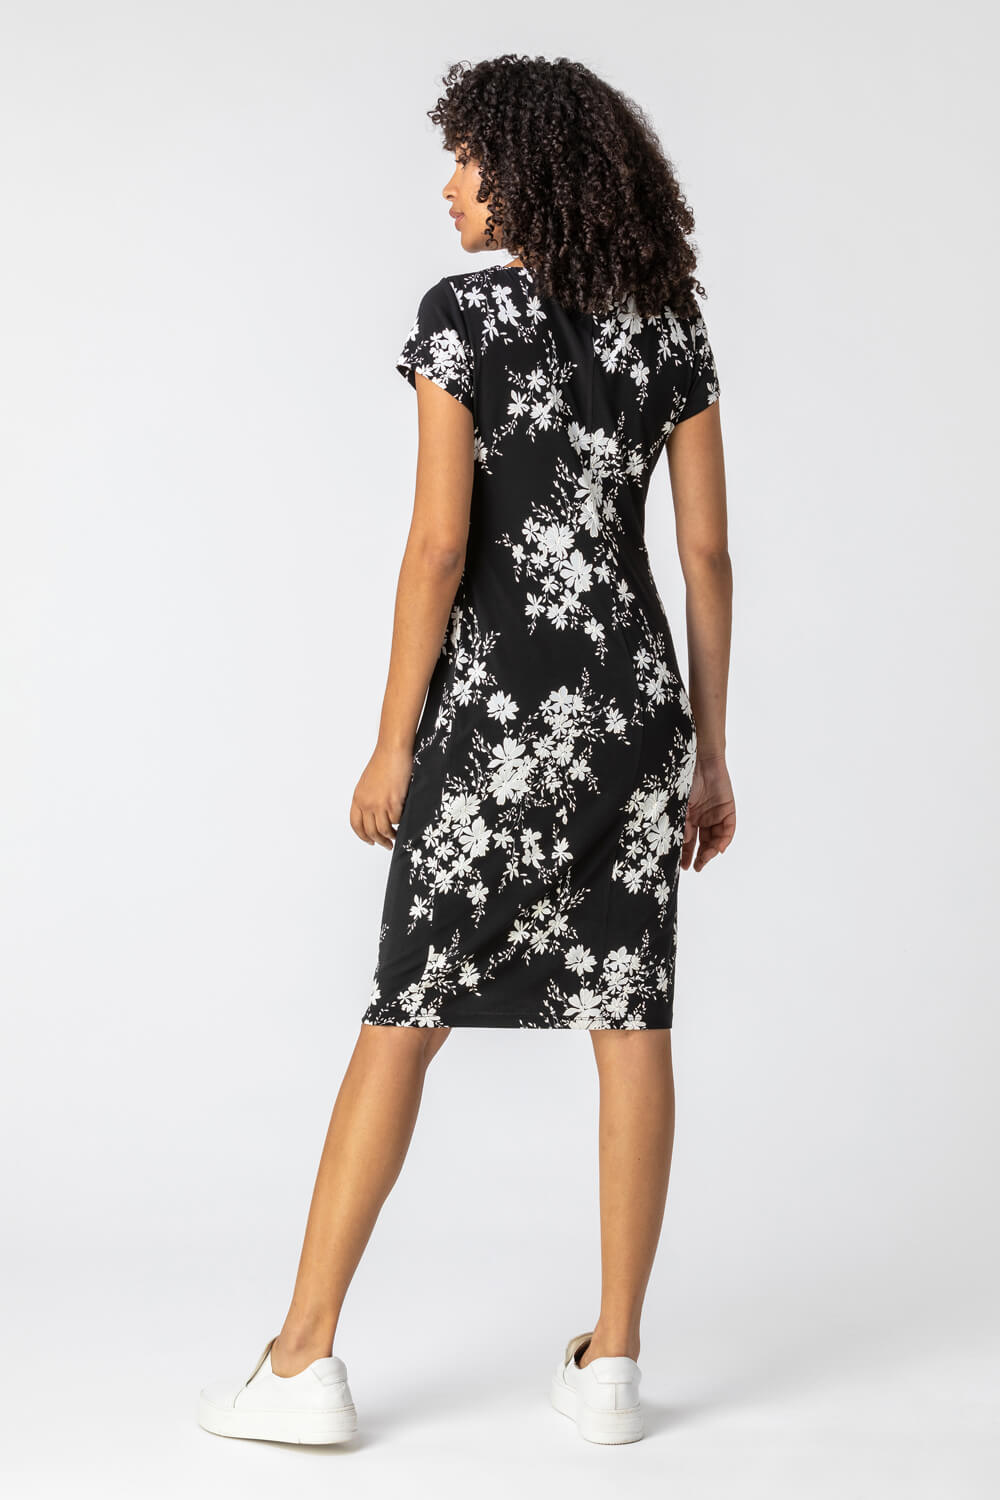 Black Floral Puff Print Side Ruched Dress, Image 2 of 4